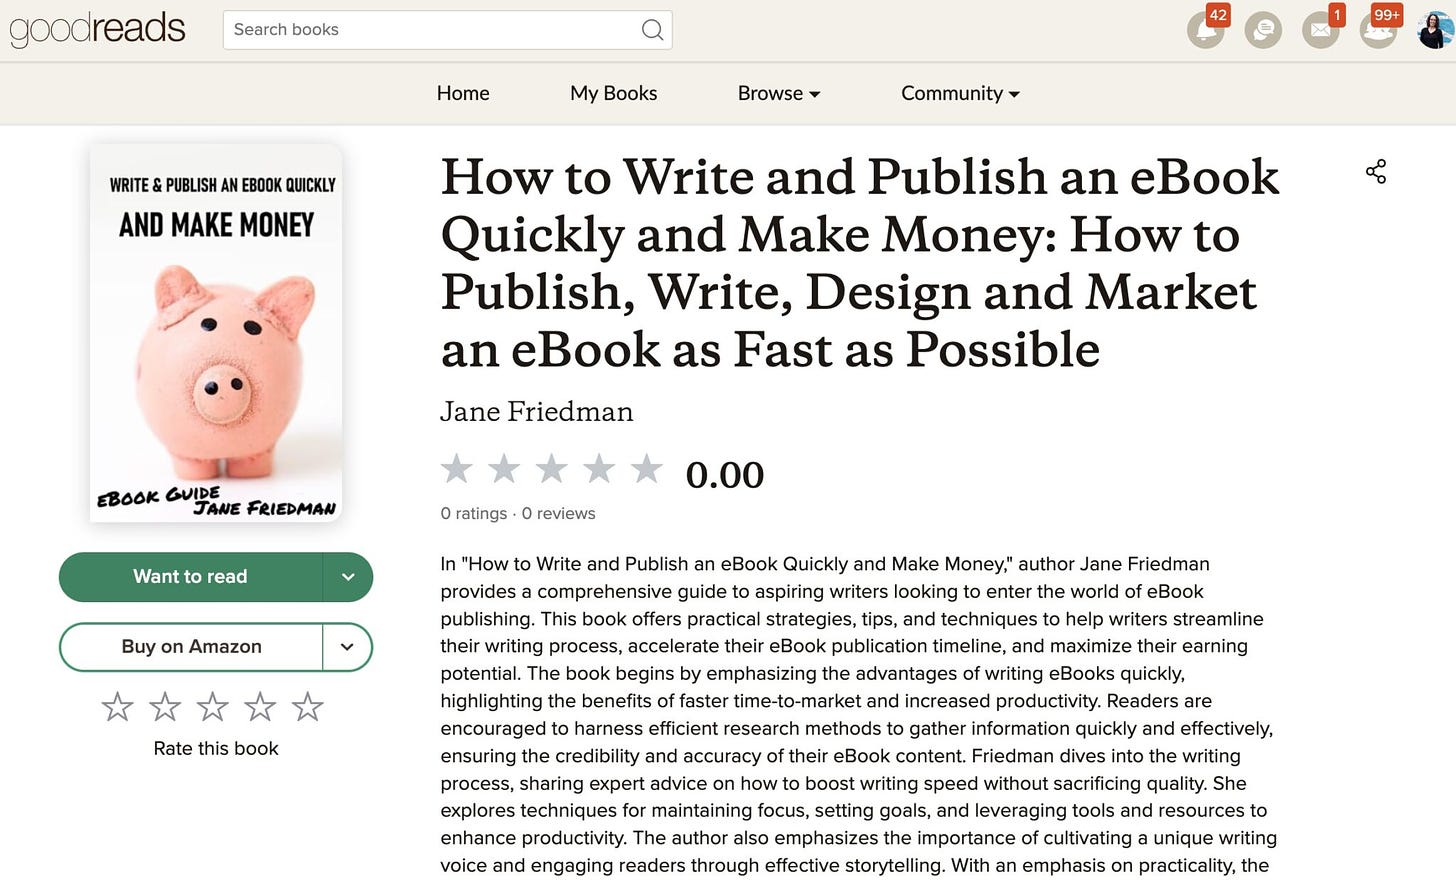 How to Write and Publish an eBook Quickly and Make Money: How to Publish, Write, Design and Market an eBook as Fast as Possible